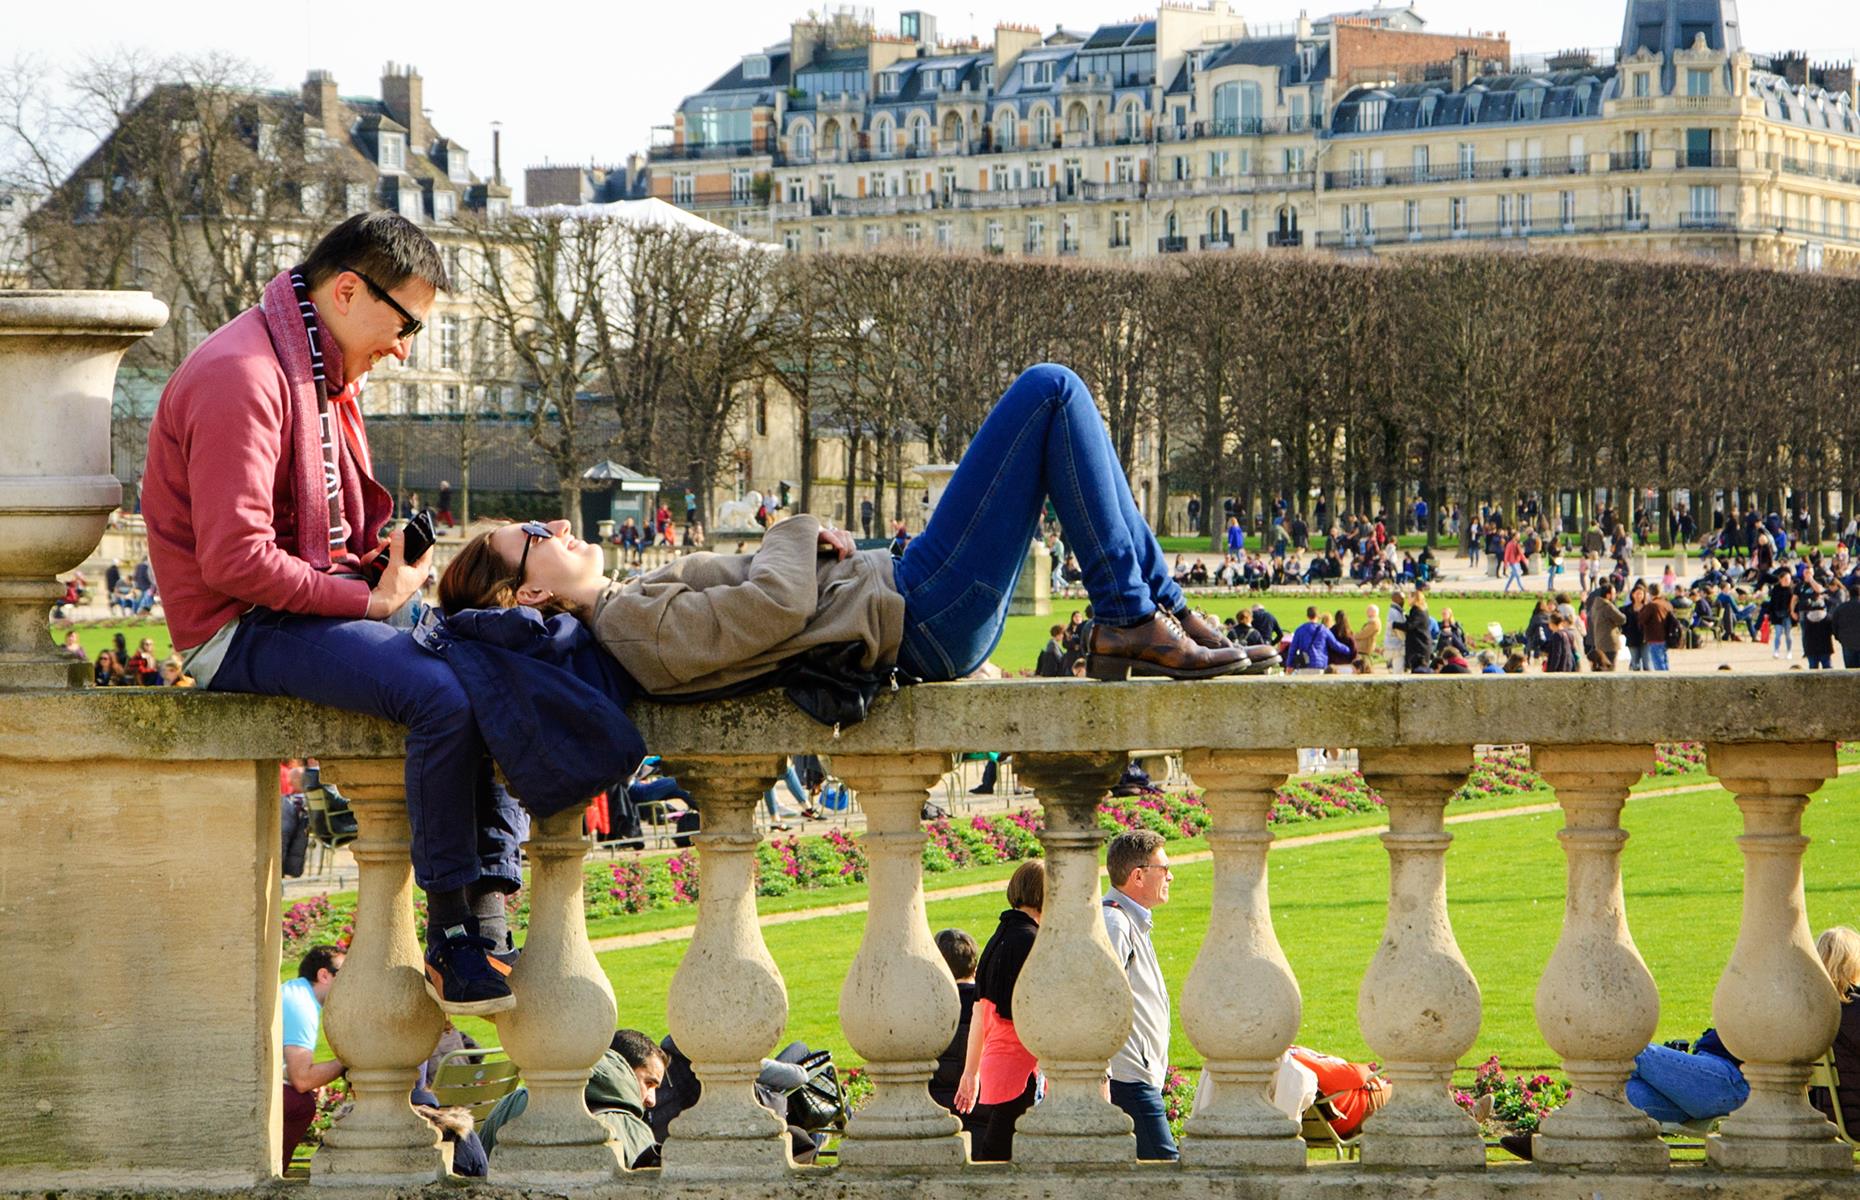 <p>Pull up a green chair and chill out in one of <a href="https://www.loveexploring.com/guides/64347/what-to-do-in-paris-guide">Paris</a>’ most elegant green spaces. Kids will love racing toy boats on the ornamental pond in front of the 17th-century Luxembourg Palace. Stroll through woods and past elaborate fountains and elegant statues. Play a round of tennis if you're feeling active – if not, exercise the brain with a game of chess.</p>  <p><strong><a href="https://www.loveexploring.com/news/141418/astounding-royal-residences-you-can-actually-visit">You can actually visit these stunning royal residences</a></strong></p>